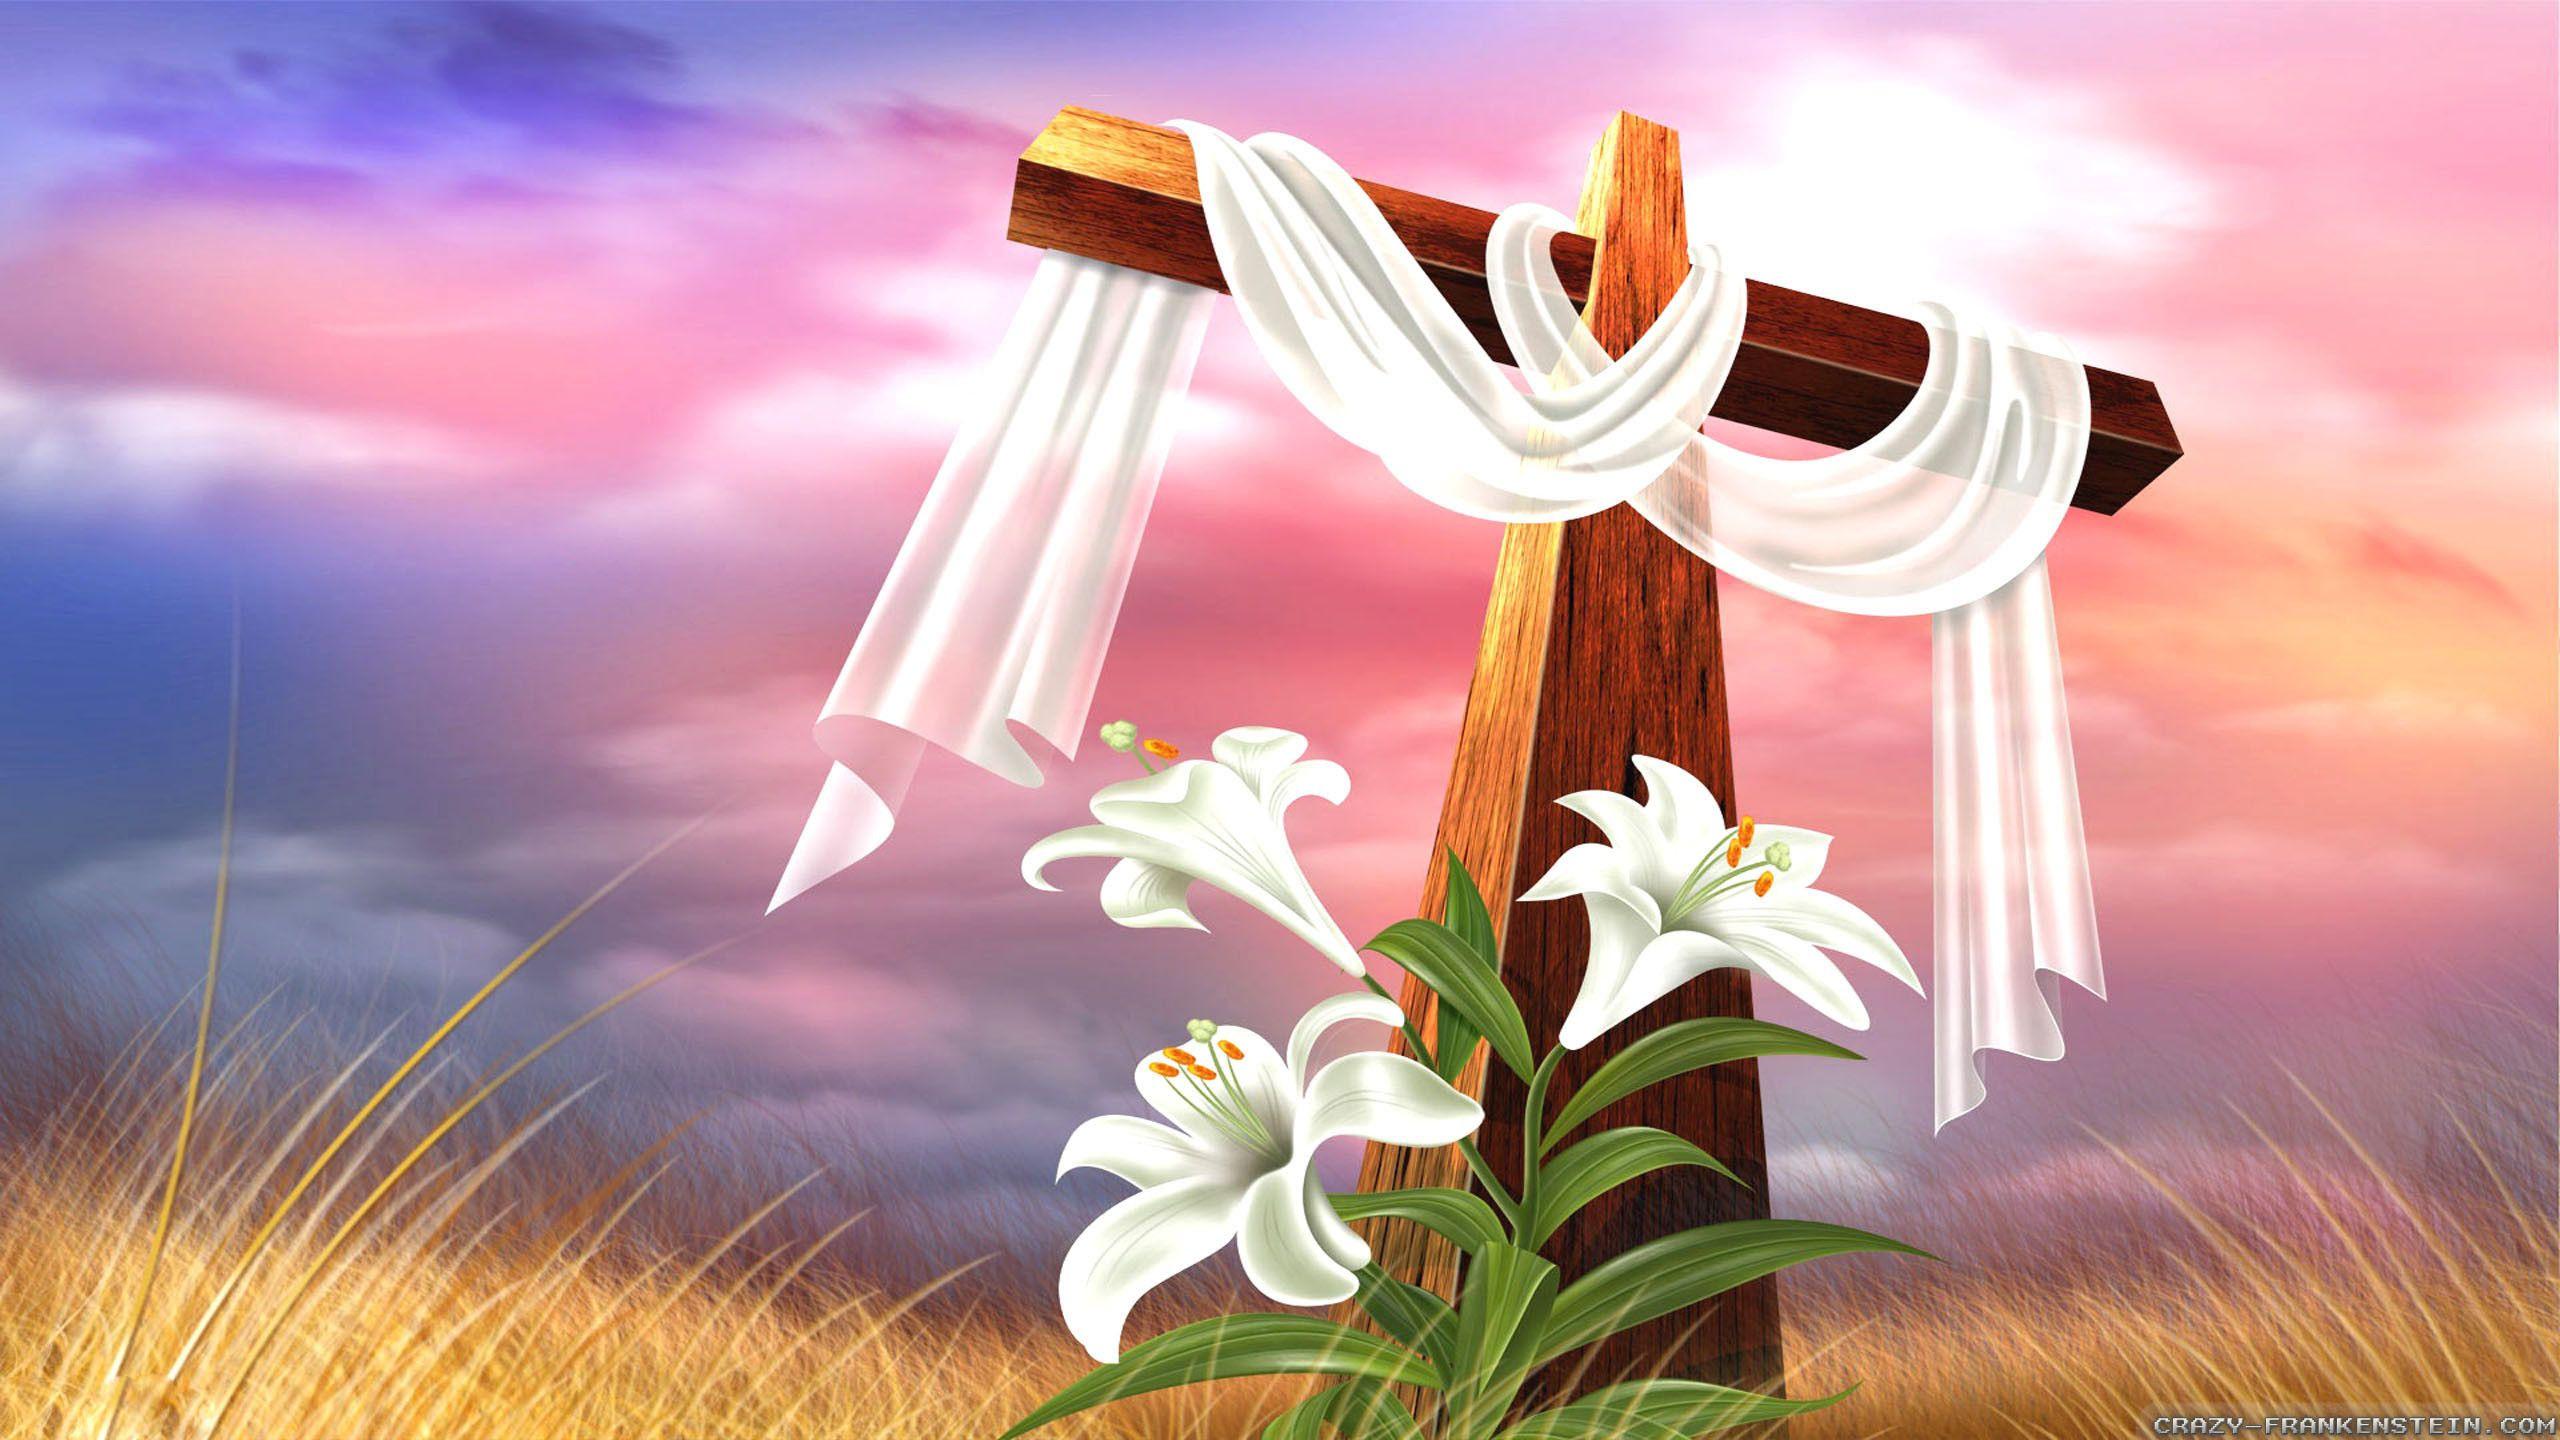 Christian Cross on Abstract Landscape Background with Rays of Glory Religious  Easter Stock Photo  Image of good glory 167686540